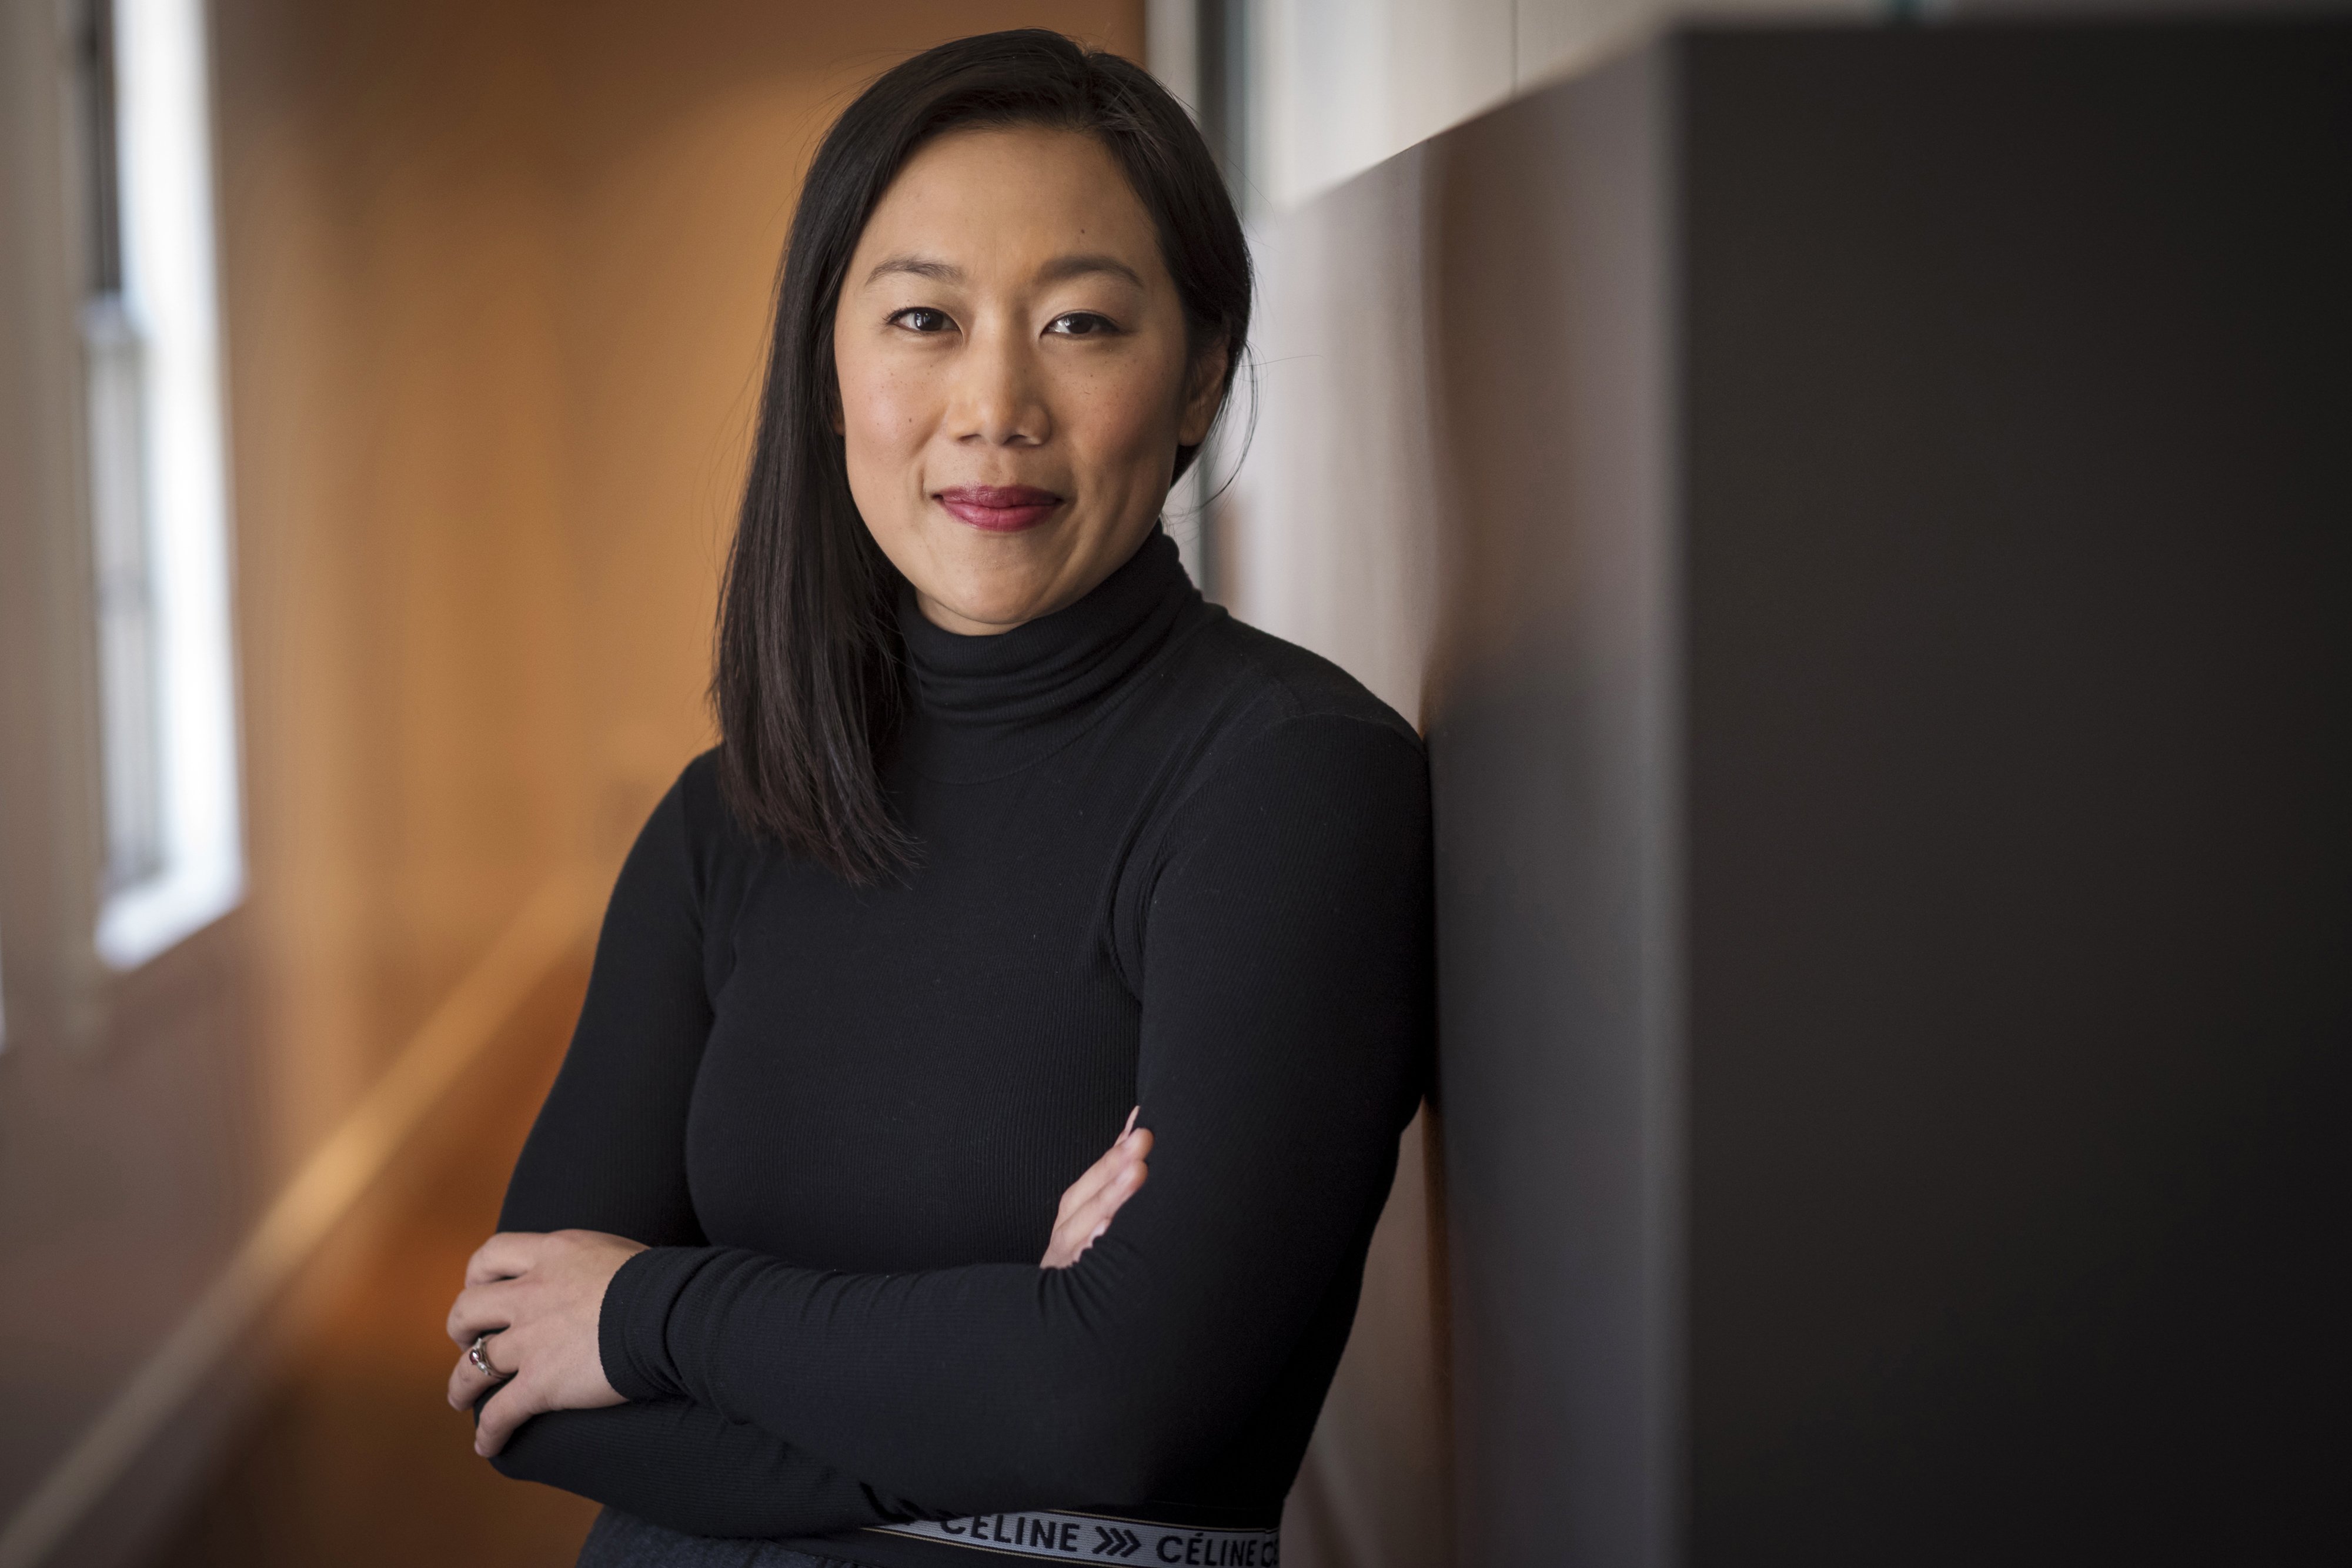 Priscilla Chan after a Bloomberg Technology television interview in San Francisco, California, U.S., on Thursday, Jan. 24, 2019 | Photo: Getty Images